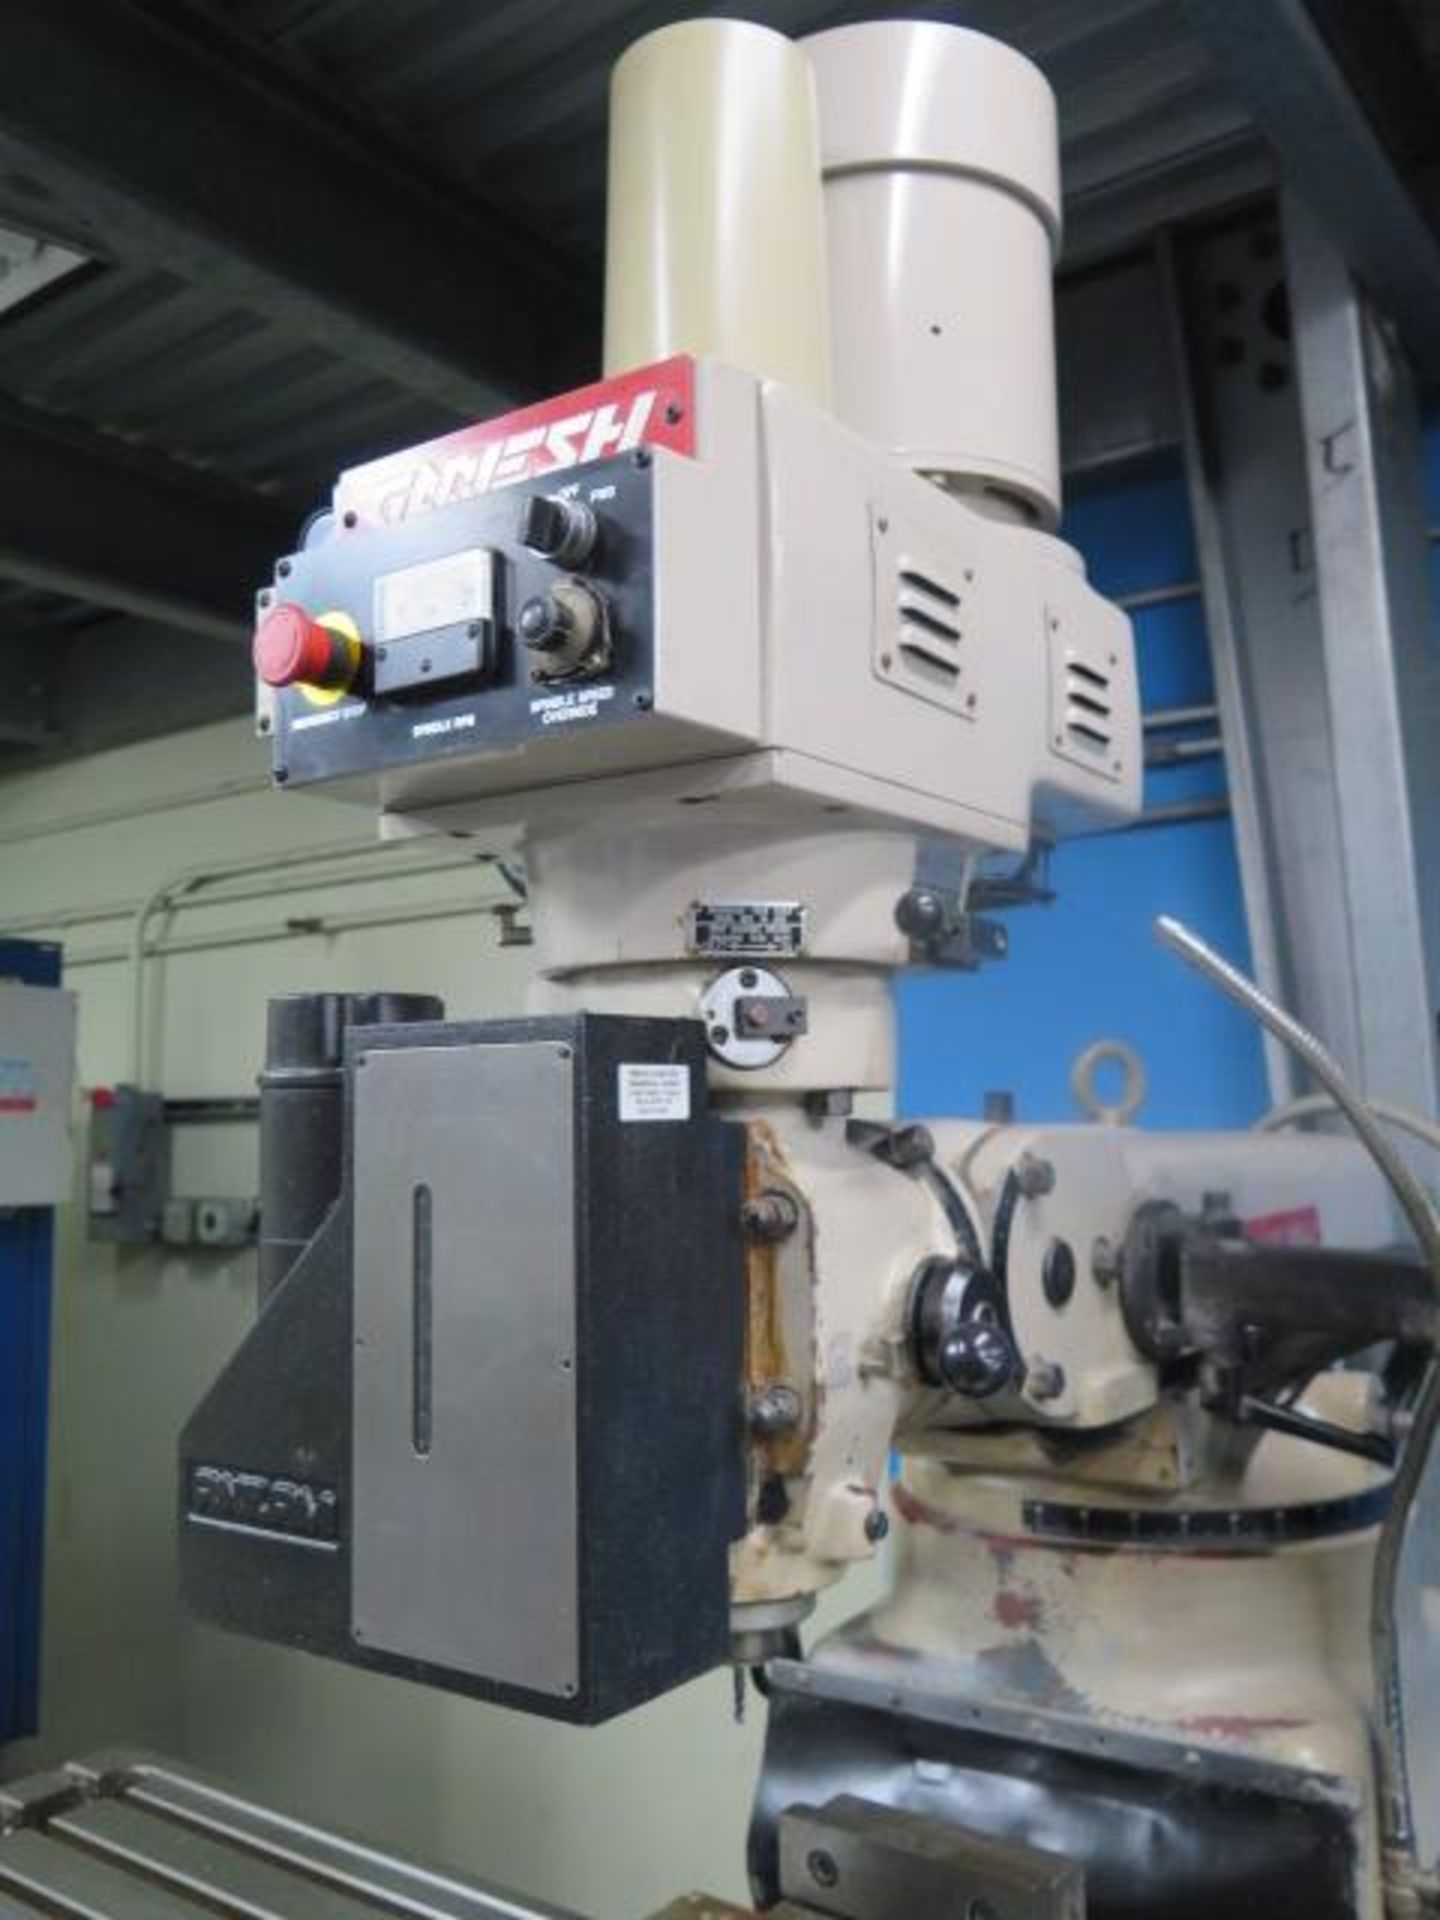 2000 Ganesh Deluxe GMV-3 3-Axis CNC Vertical Mill s/n 11617 w/ Anilam 3300 MK Controls, SOLD AS IS - Image 5 of 15